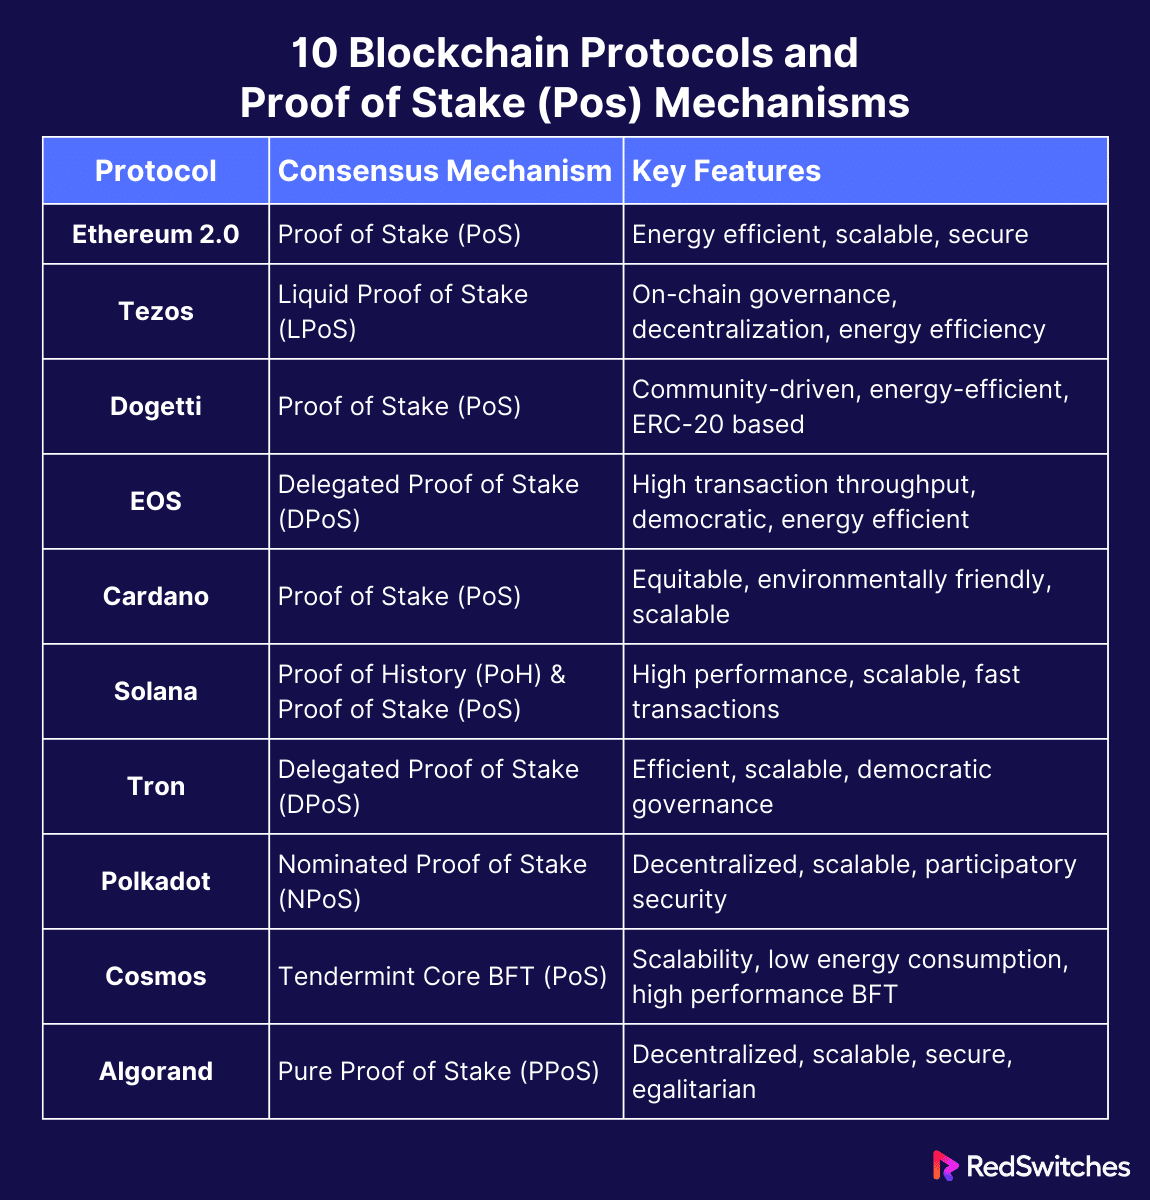 10 Blockchain Protocols and Proof of Stake (Pos) Mechanisms
